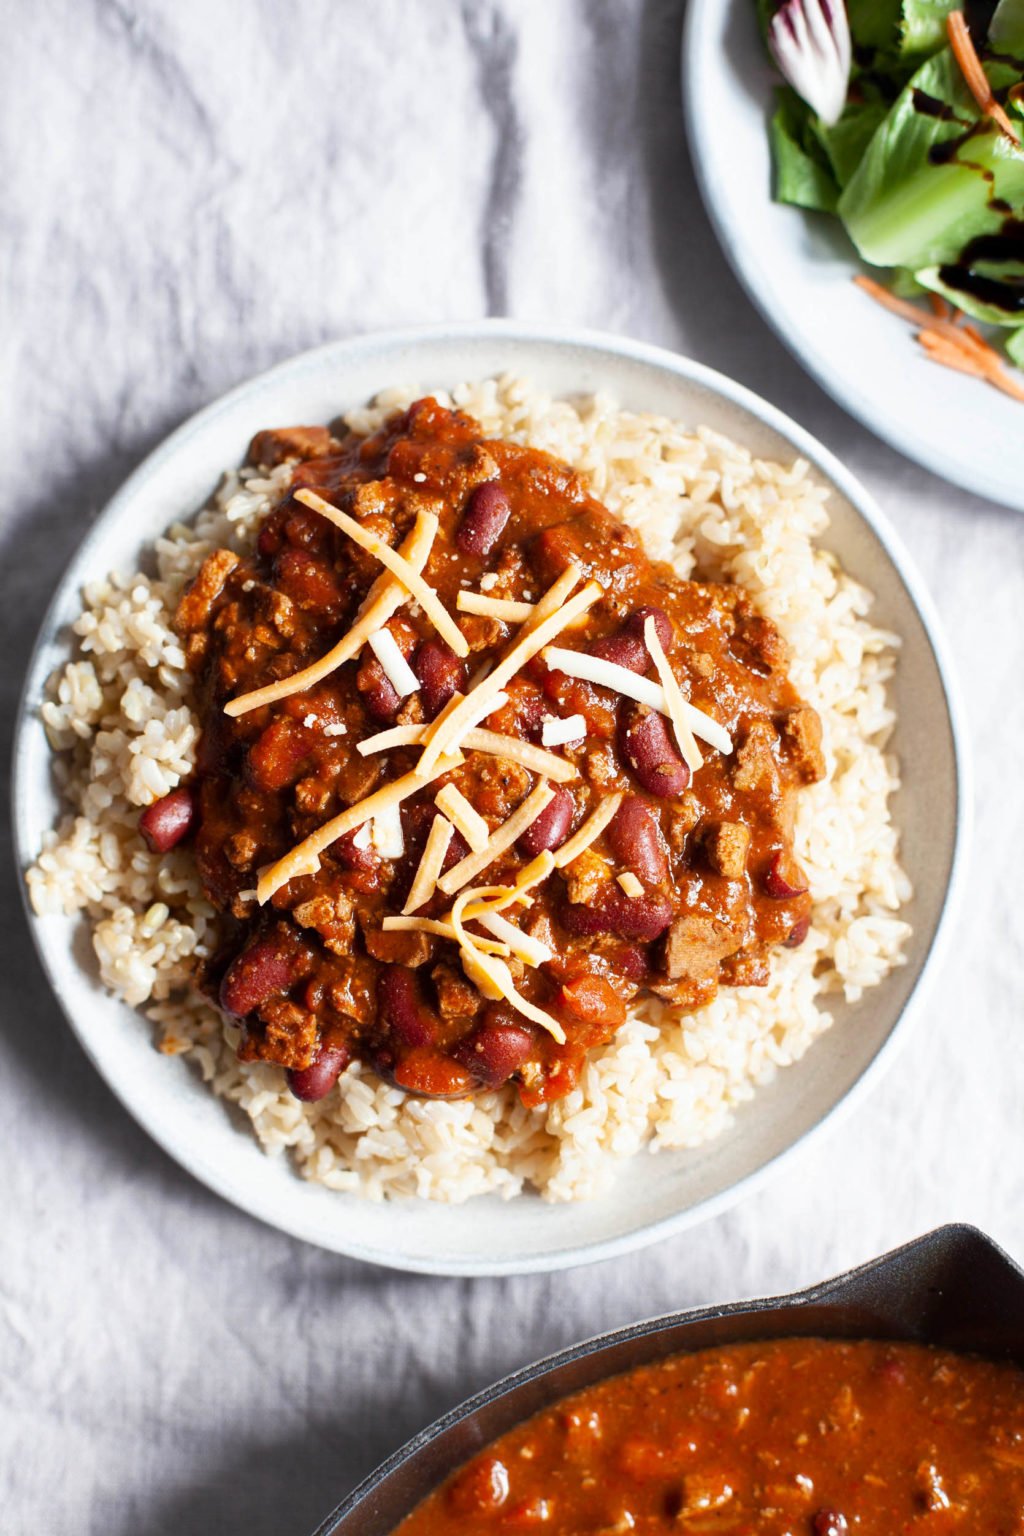 A plant-based tofu chili is topped with vegan cheese and piled over a plate of brown rice.